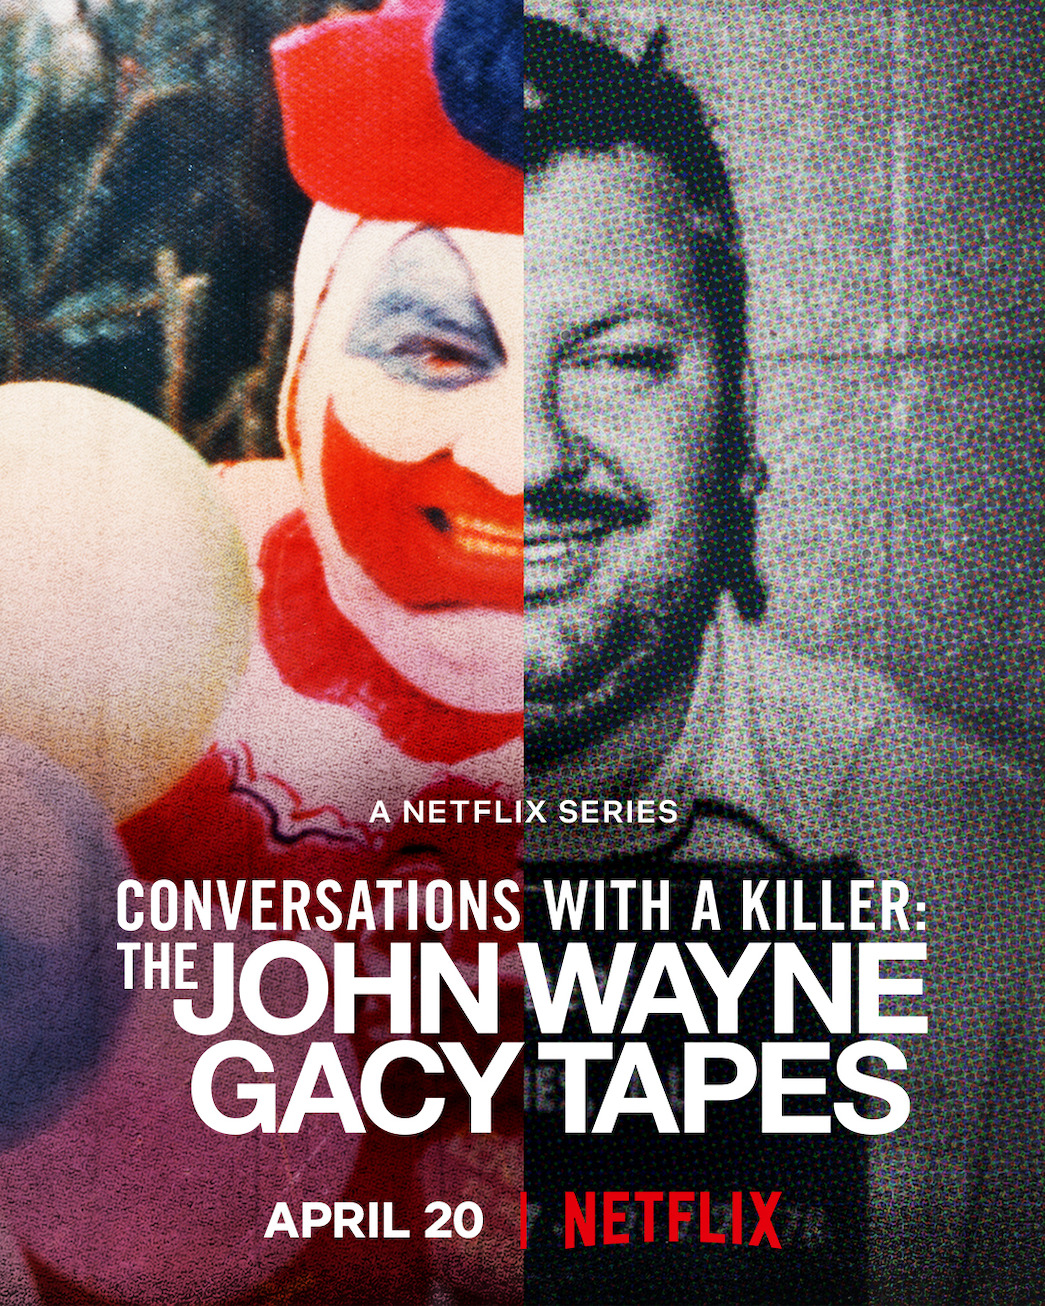 ‘Conversations with a Killer The John Wayne Gacy Tapes’ Trailer